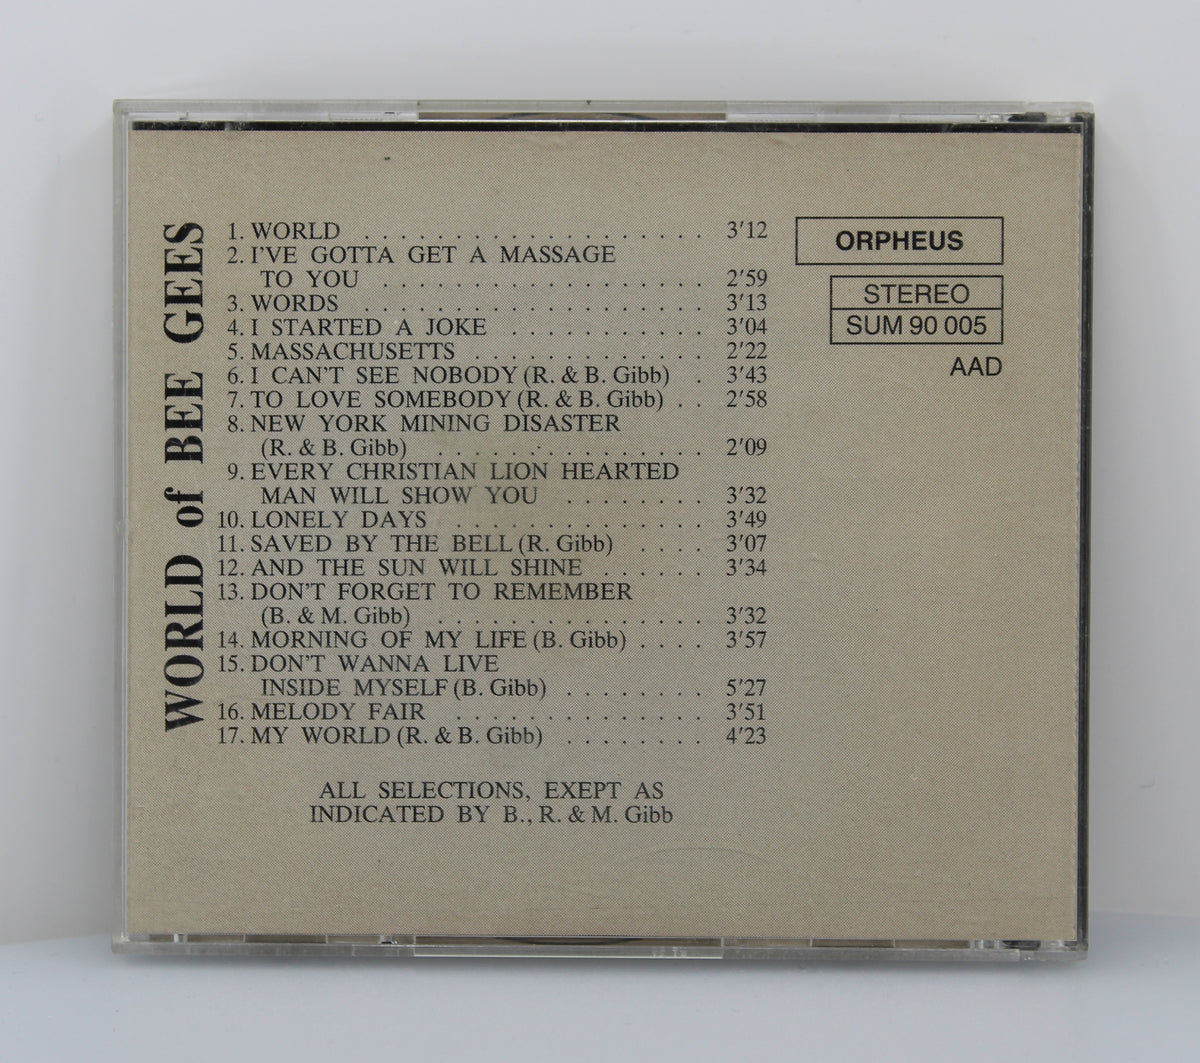 Bee Gees - World Of Bee Gees, CD